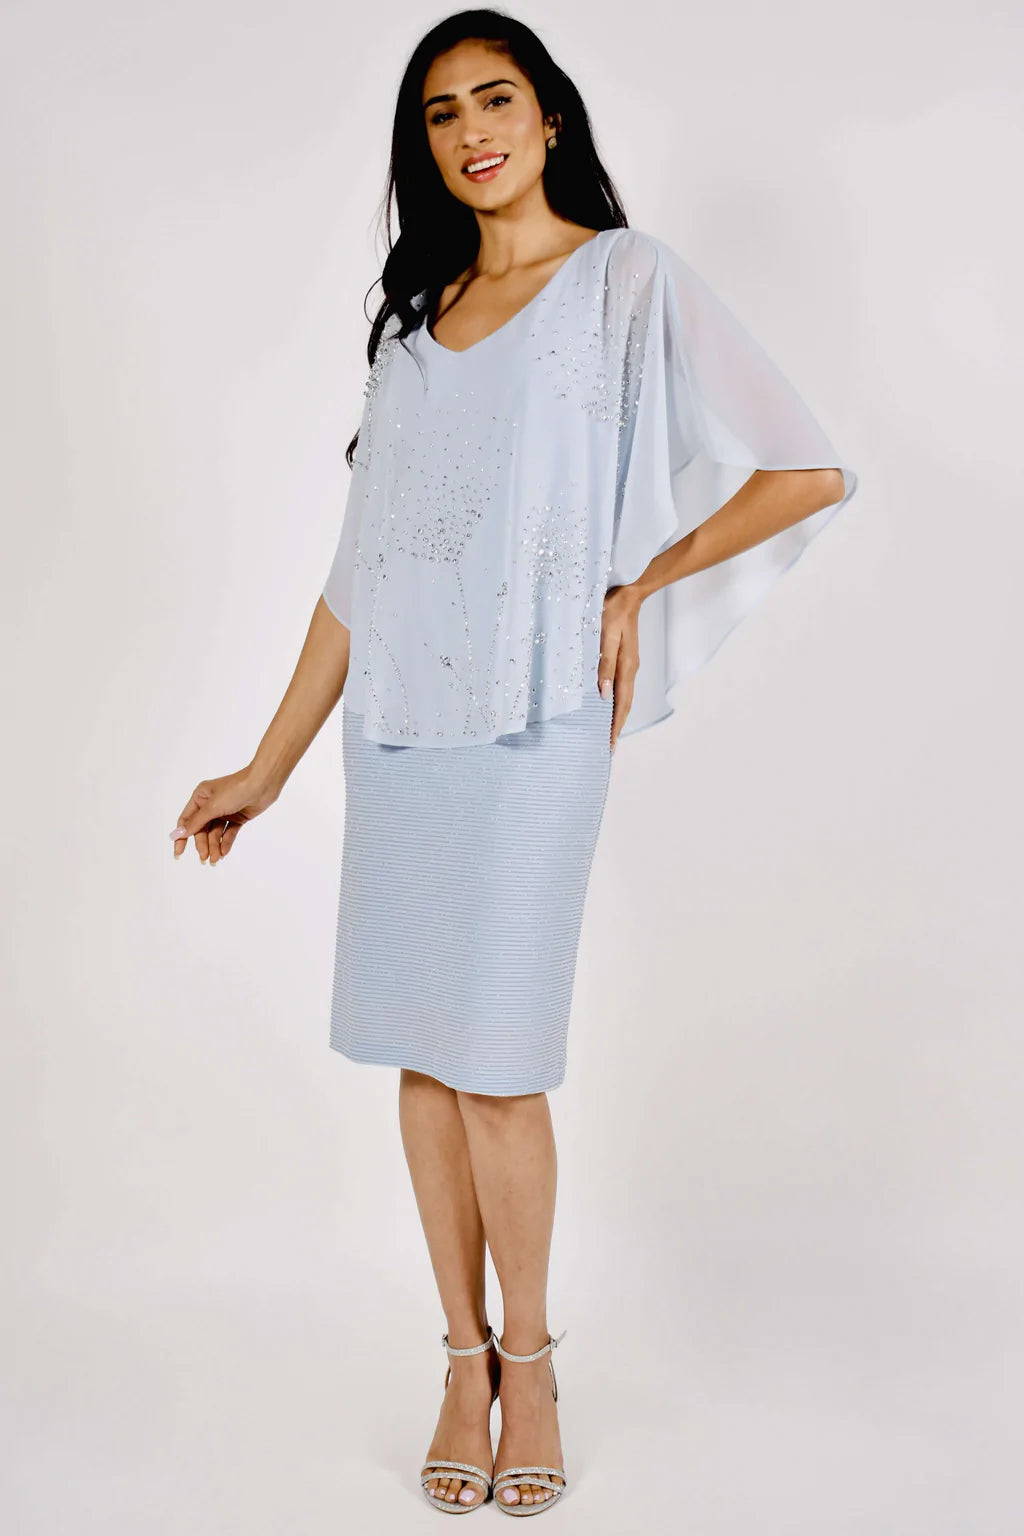 Baby Blue Lurex Dress 222188 - After Hours Boutique